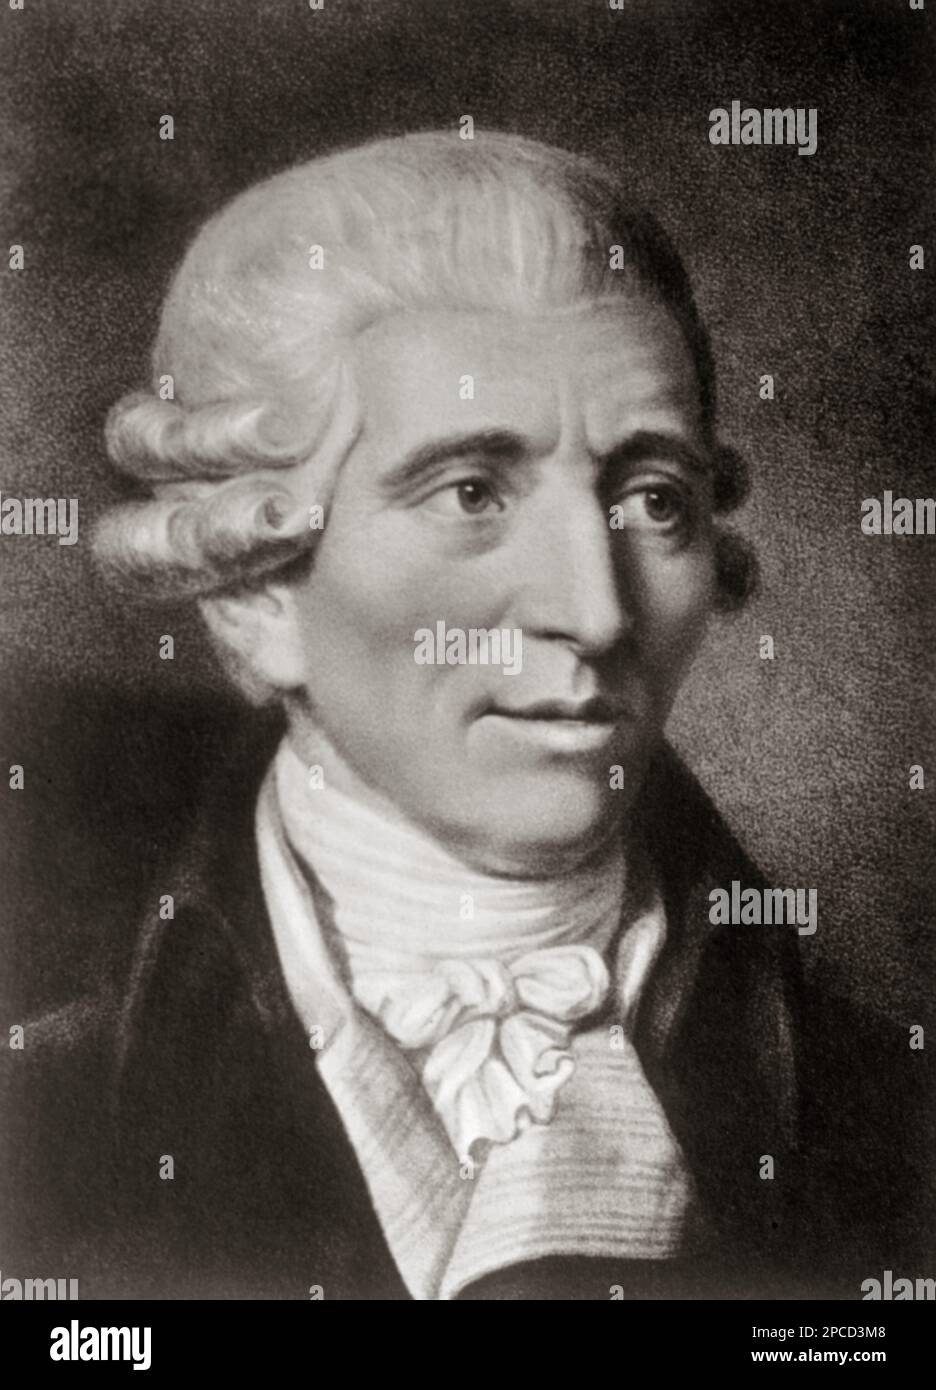 The celebrated austrian Baroque music composer  Franz JOSEPH HAYDN ( 1732 - 1809 ).A life-long citizen of Austria, Haydn spent much of his career as a court musician for the wealthy Hungarian Esterhezy family on their remote estate. - MUSICA CLASSICA - CLASSICAL - JOSEF - COMPOSITORE - MUSICISTA - portrait - ritratto - wig - parrucca - jabot -  BAROCCO - BAROCCA  ----  ARCHIVIO GBB Stock Photo